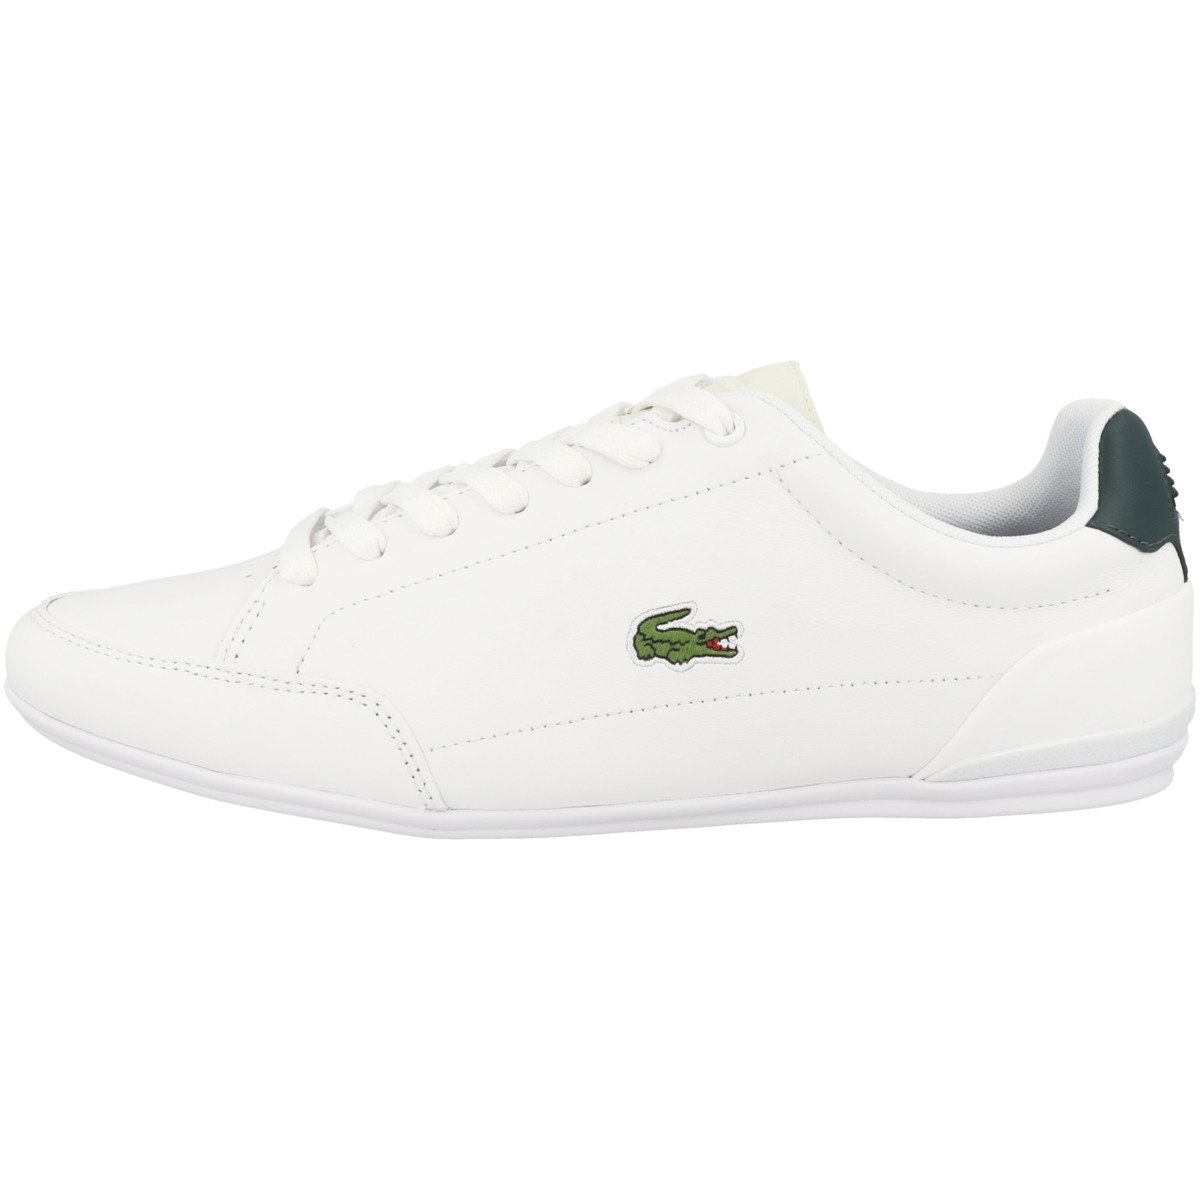 Lacoste Chaymon Crafted 0722 1 Sneaker low weiss